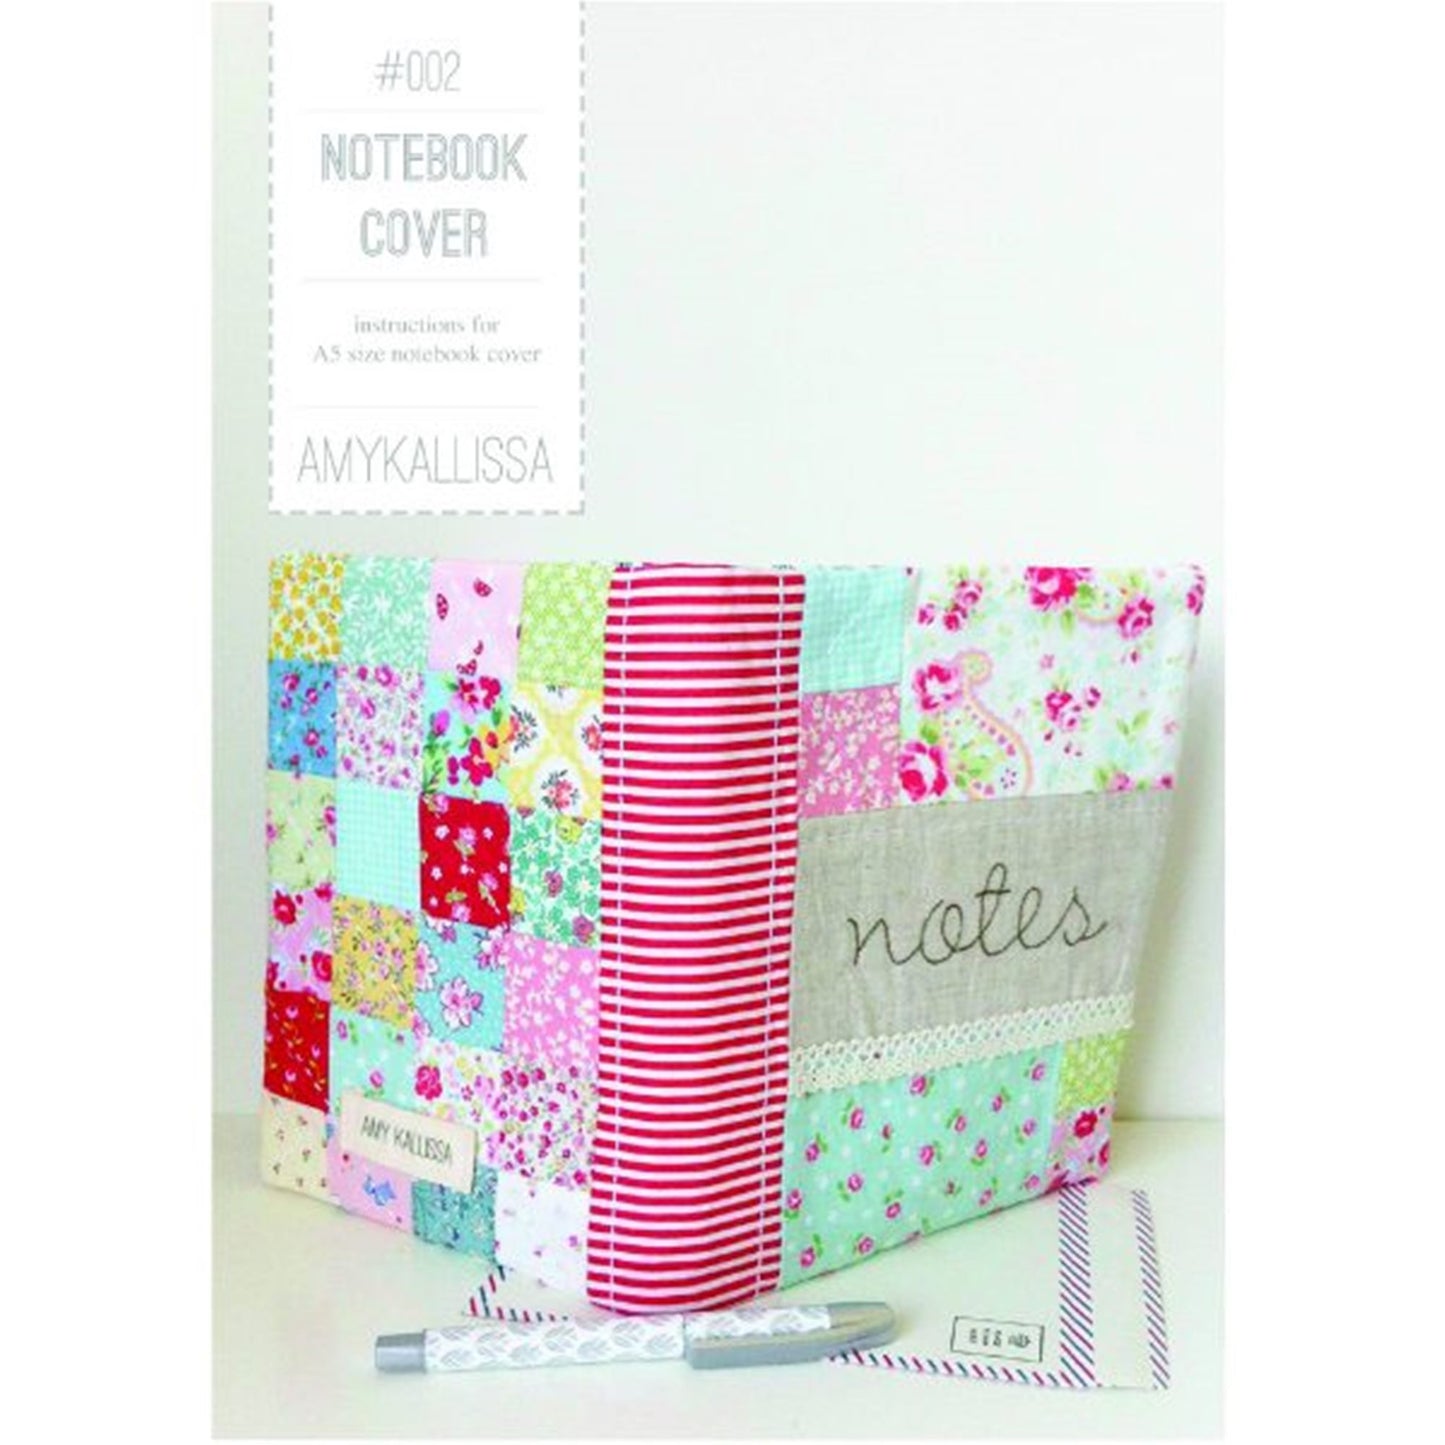 Notebook Cover fits A5 journal patchwork, embroidery project paper pattern - Amy Kalissa